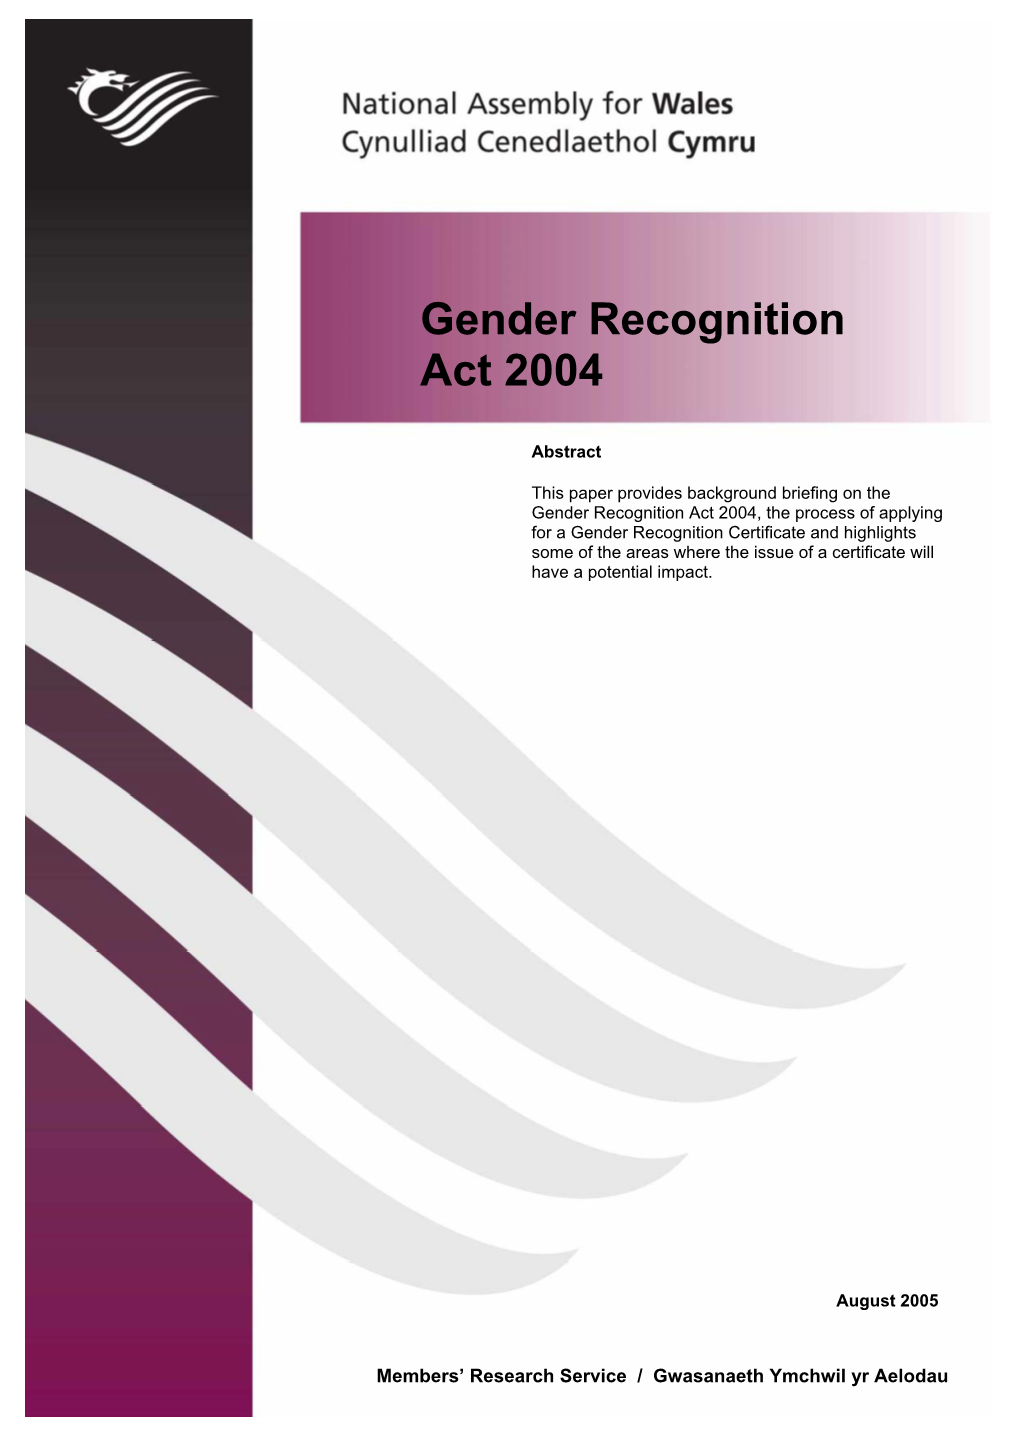 Gender Recognition Act 2004